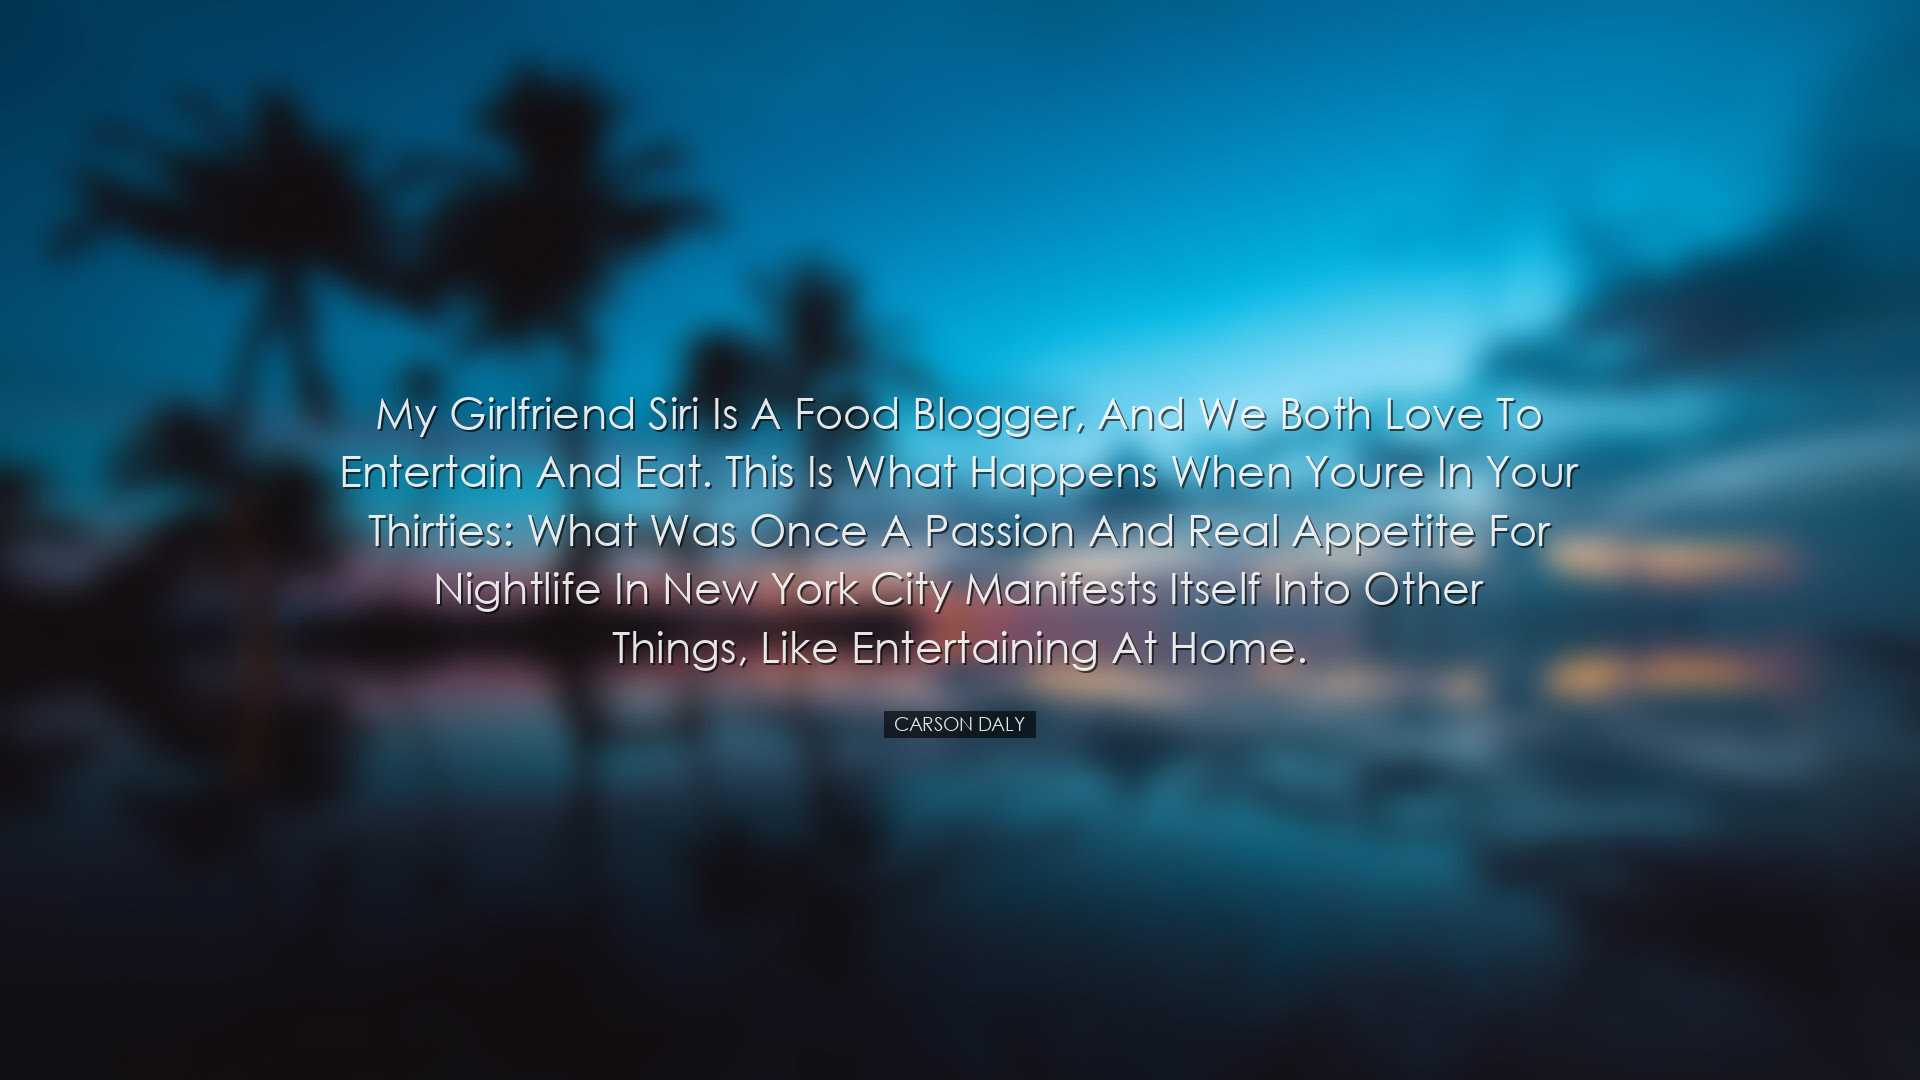 My girlfriend Siri is a food blogger, and we both love to entertai